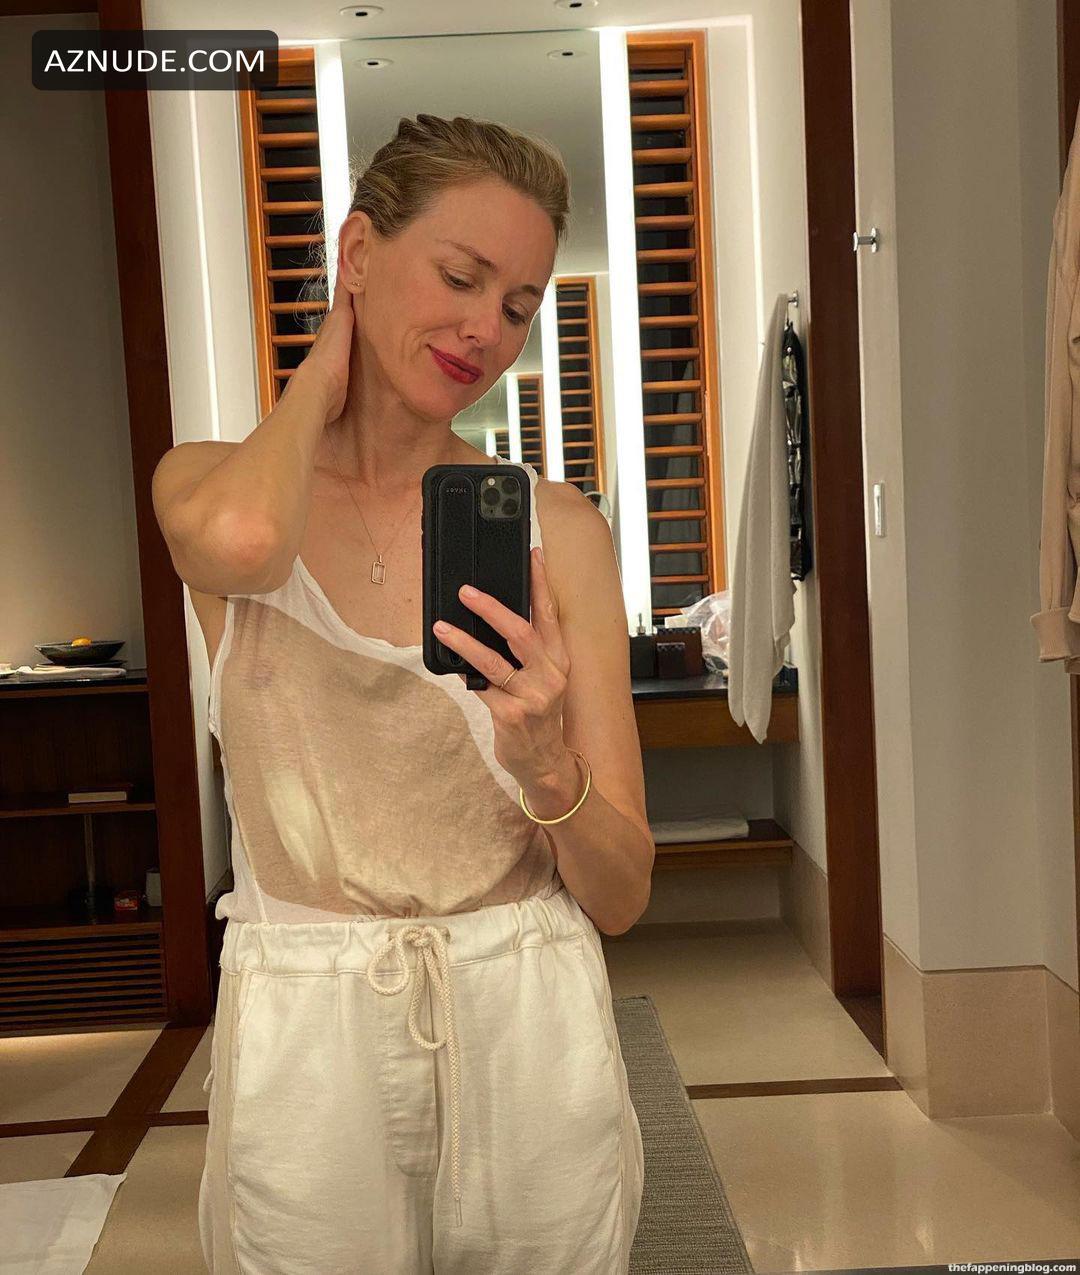 Naomi Watts Sexy Poses Braless And Takes A New Selfie Showing Nipple In